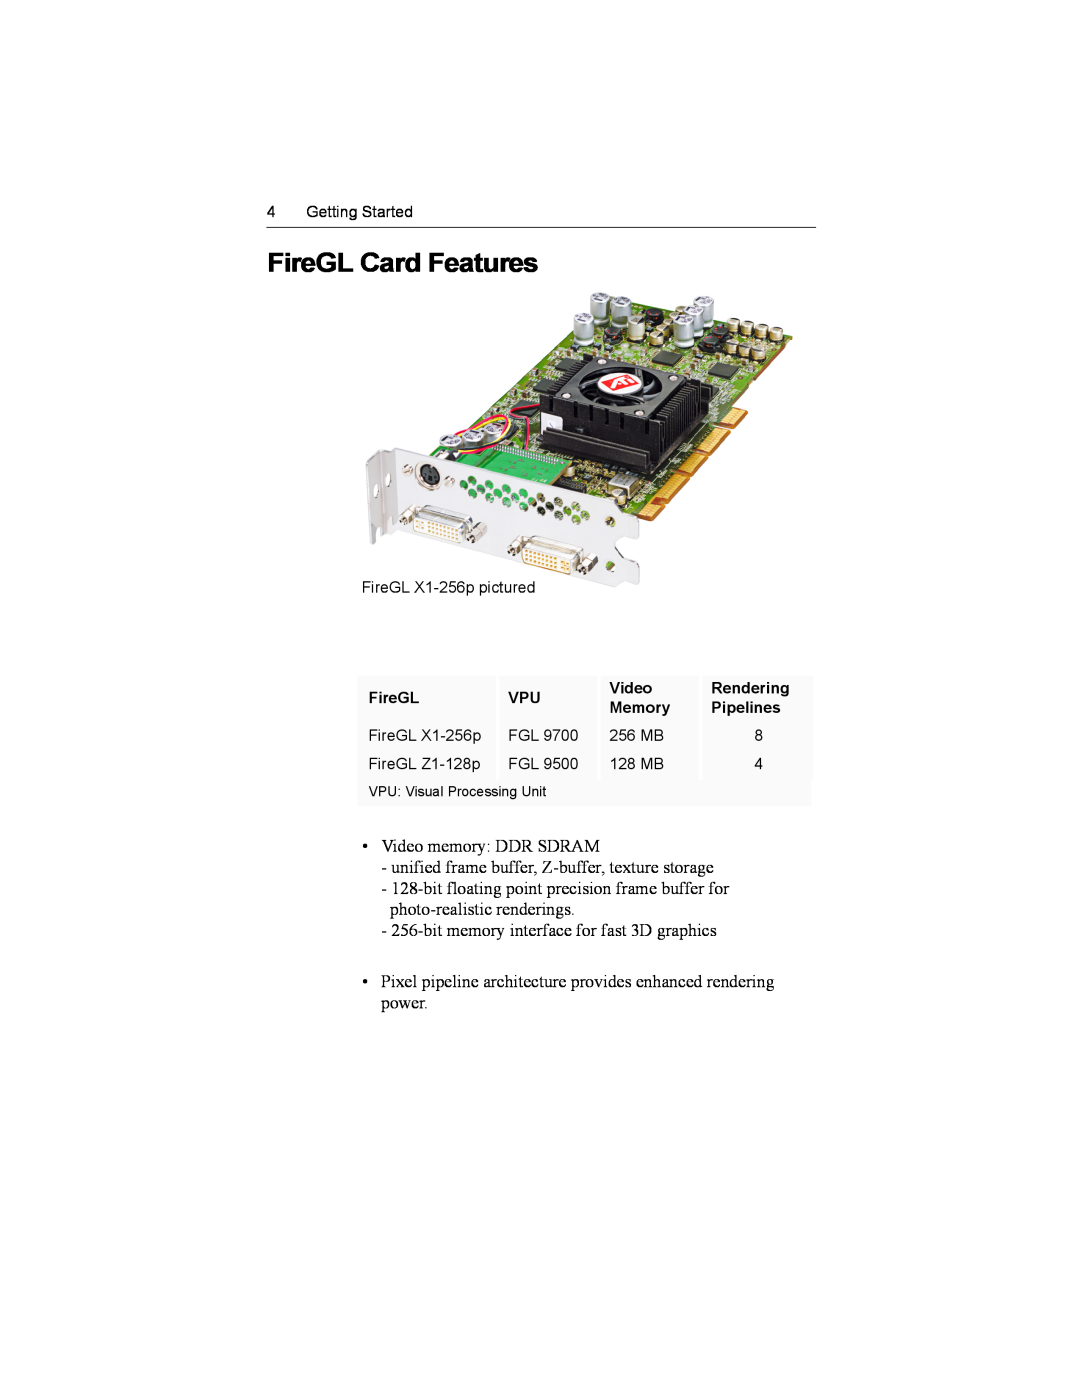 ATI Technologies Z1-128p, X1-256P specifications FireGL Card Features 